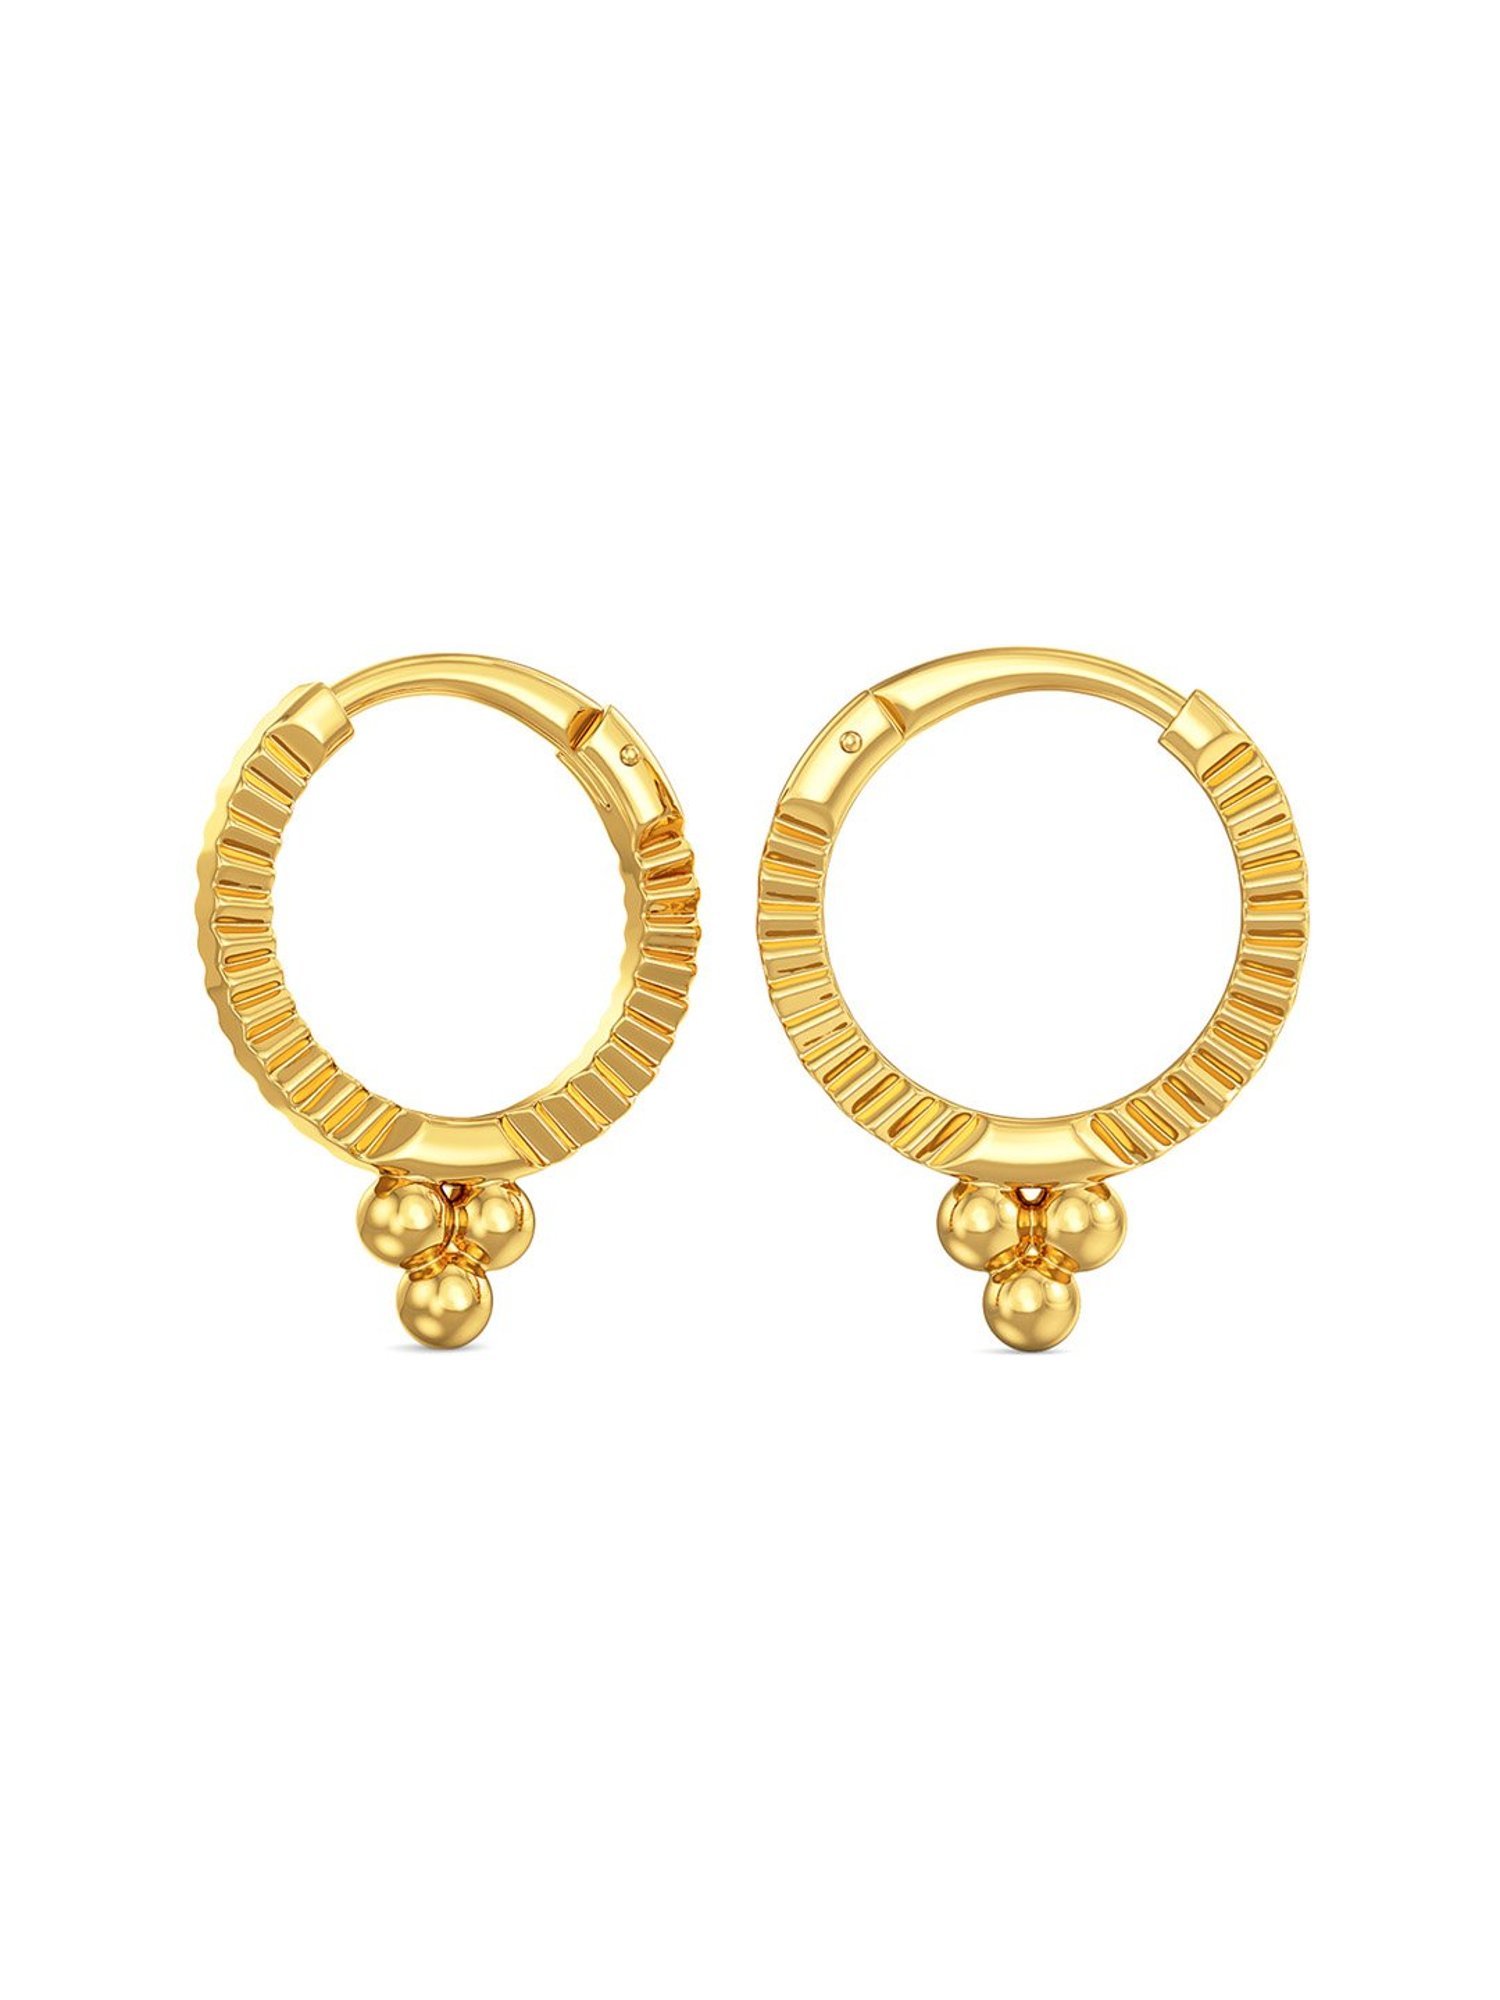 ARY D'PO • Twisted Small Hoop Earrings in 18K Yellow Gold